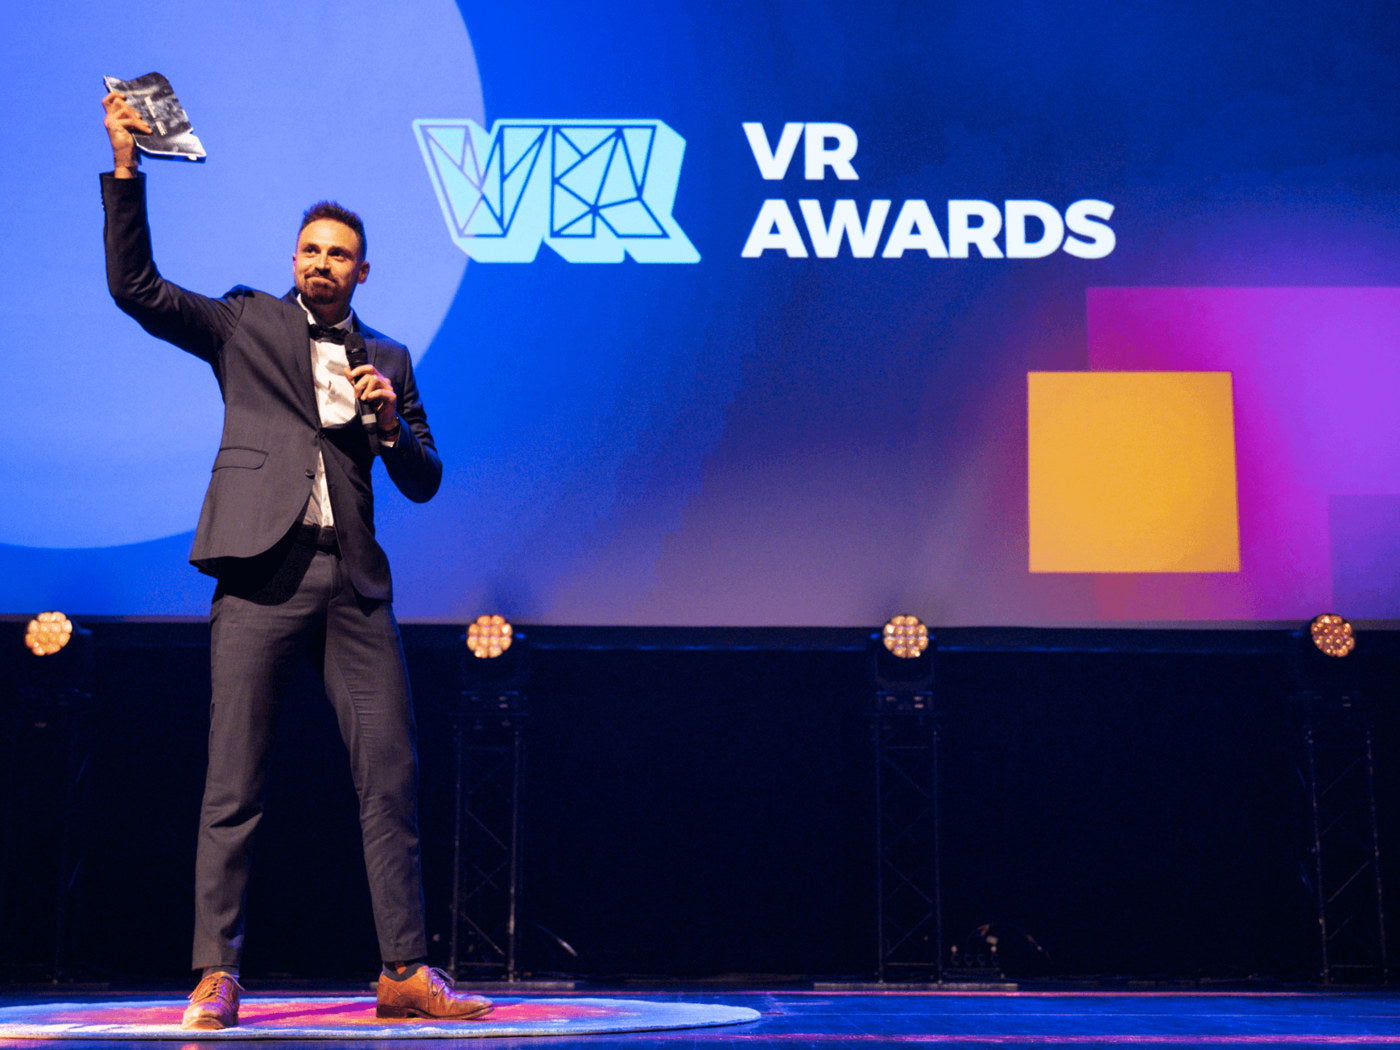 A Preview of the 7th International VR Awards